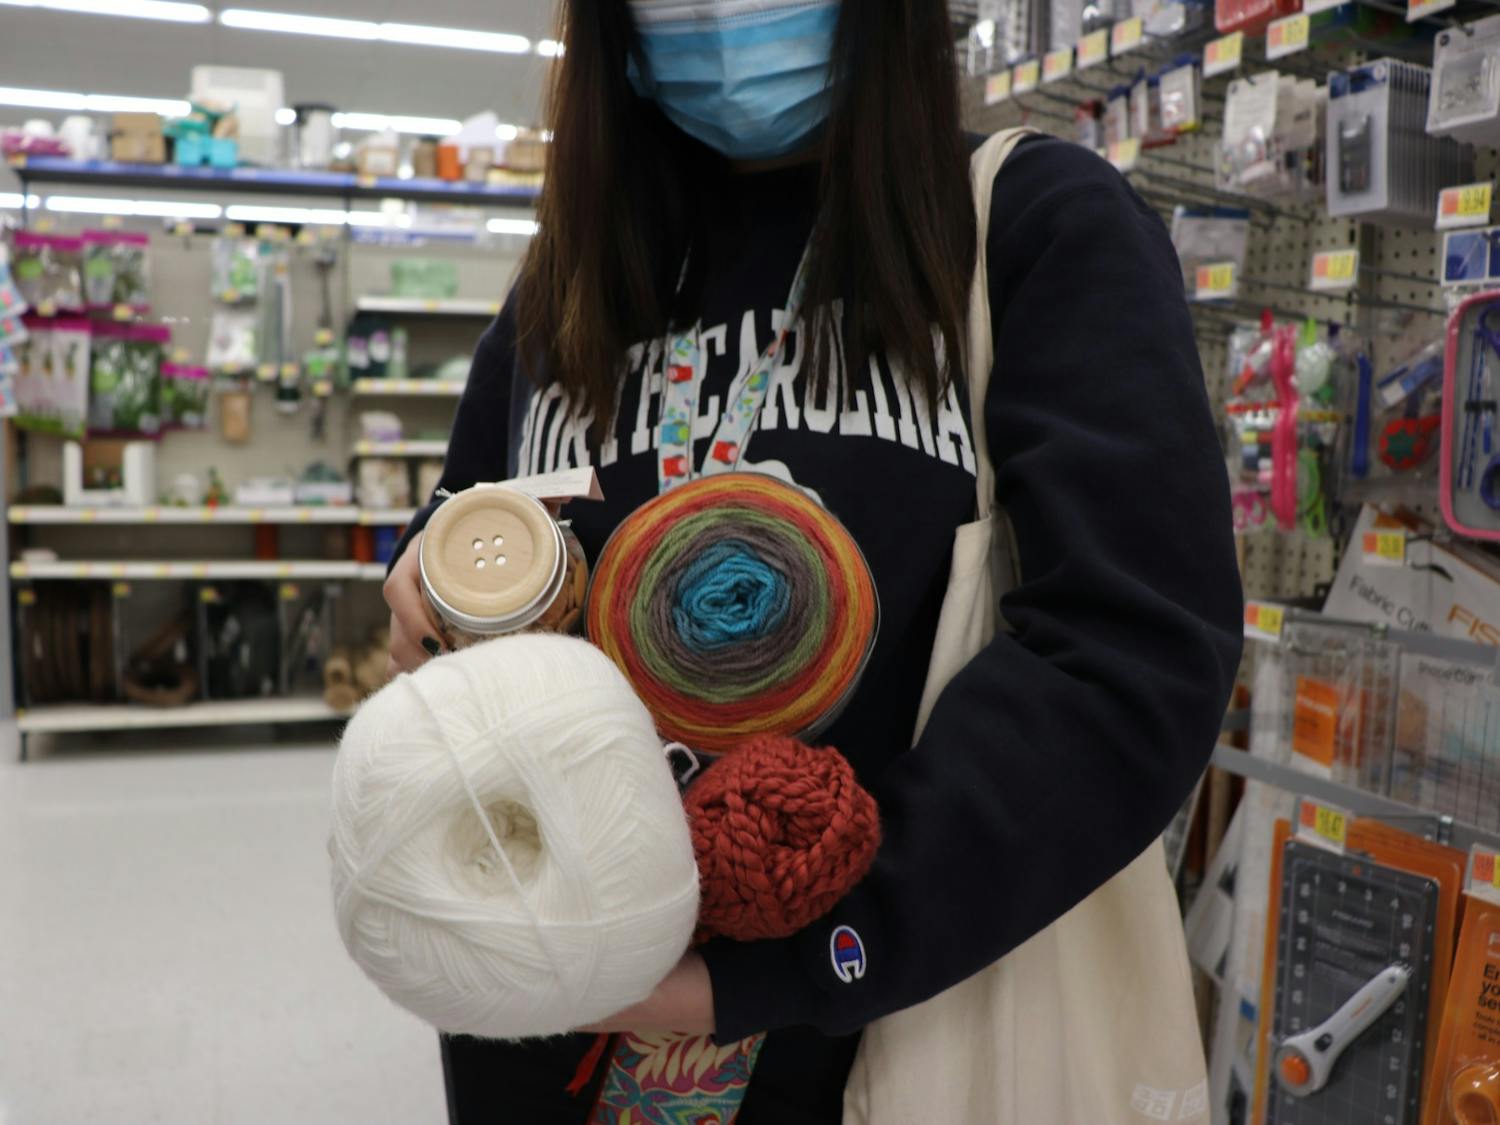 Embroidery, crocheting, poetry, graphic design, and even TikTok are just a few of the various projects UNC students have taken up during the pandemic.